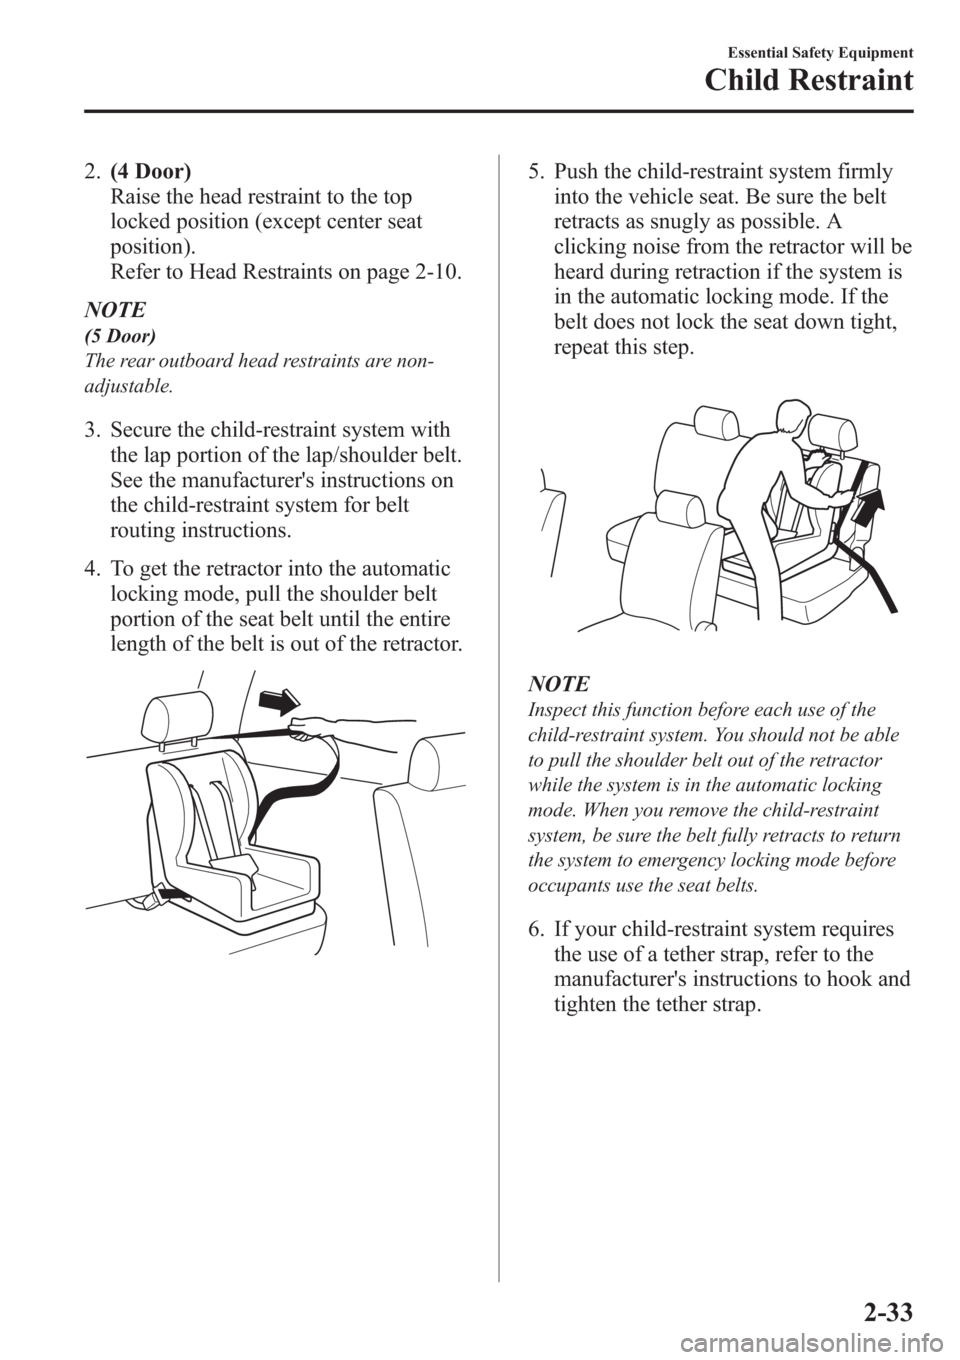 MAZDA MODEL 3 HATCHBACK 2013  Owners Manual (in English) 2.(4 Door)
Raise the head restraint to the top
locked position (except center seat
position).
Refer to Head Restraints on page 2-10.
NOTE
(5 Door)
The rear outboard head restraints are non-
adjustable